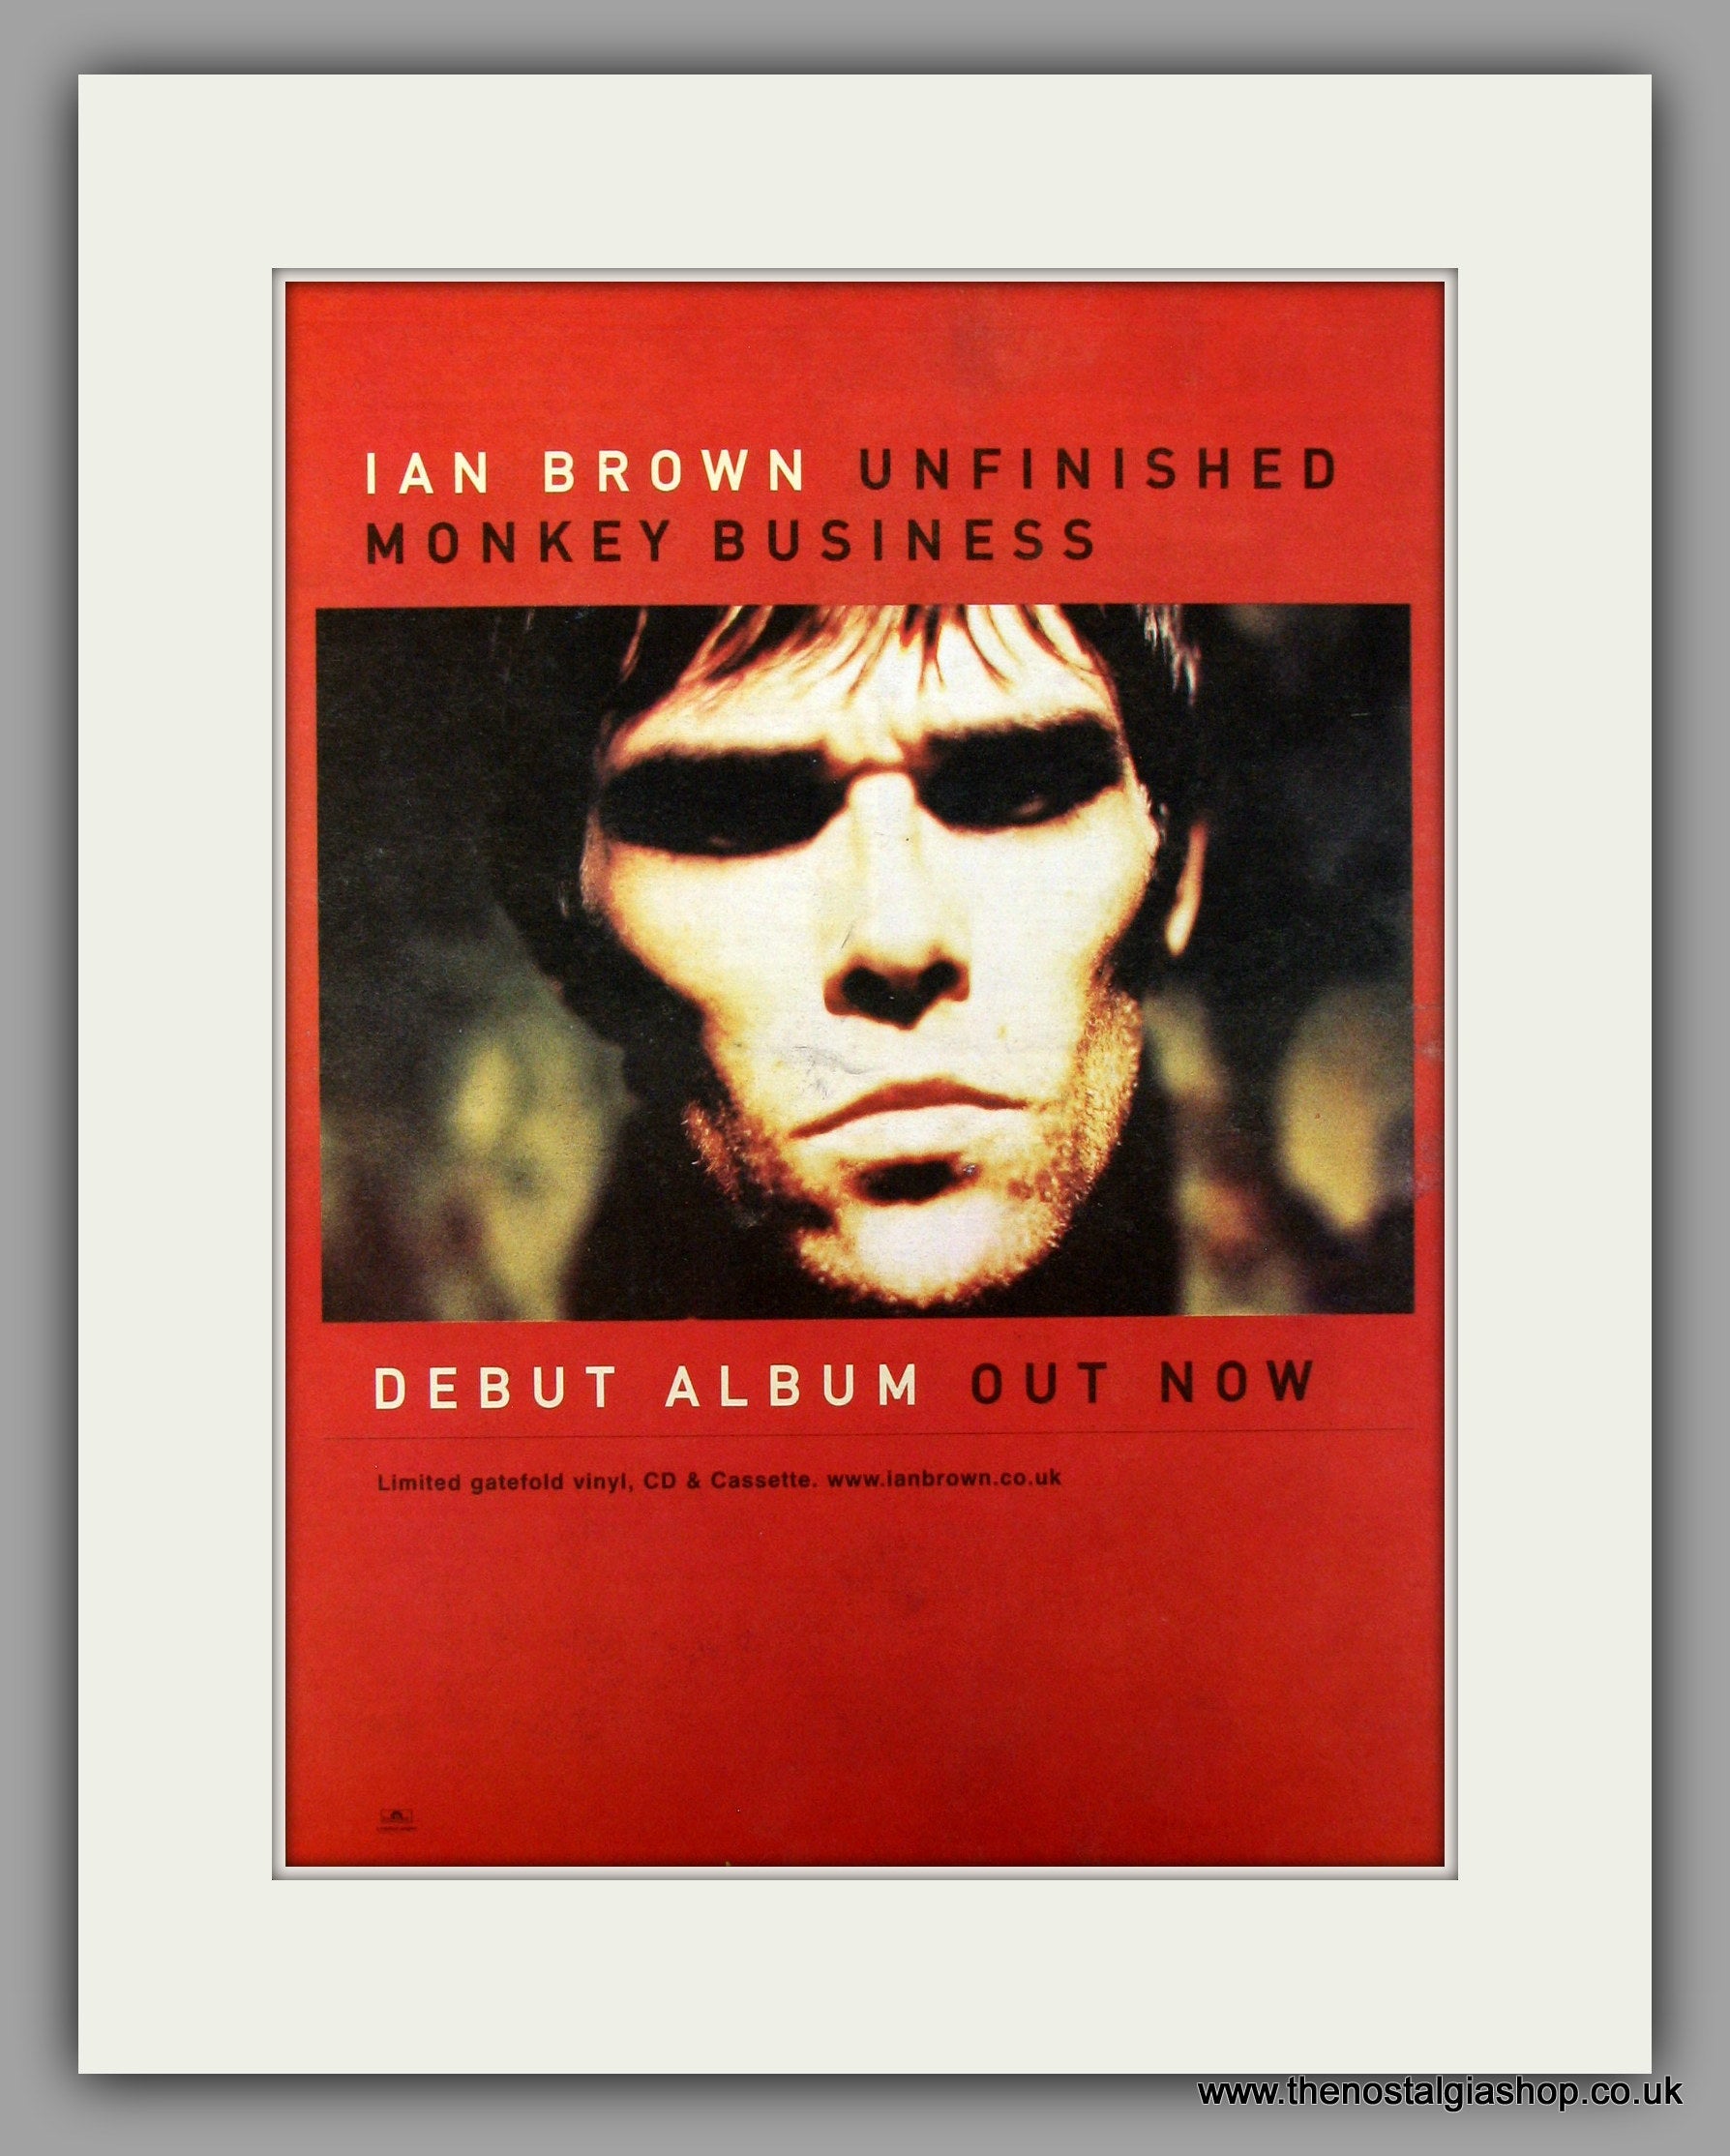 Ian Brown – Unfinished Monkey Business